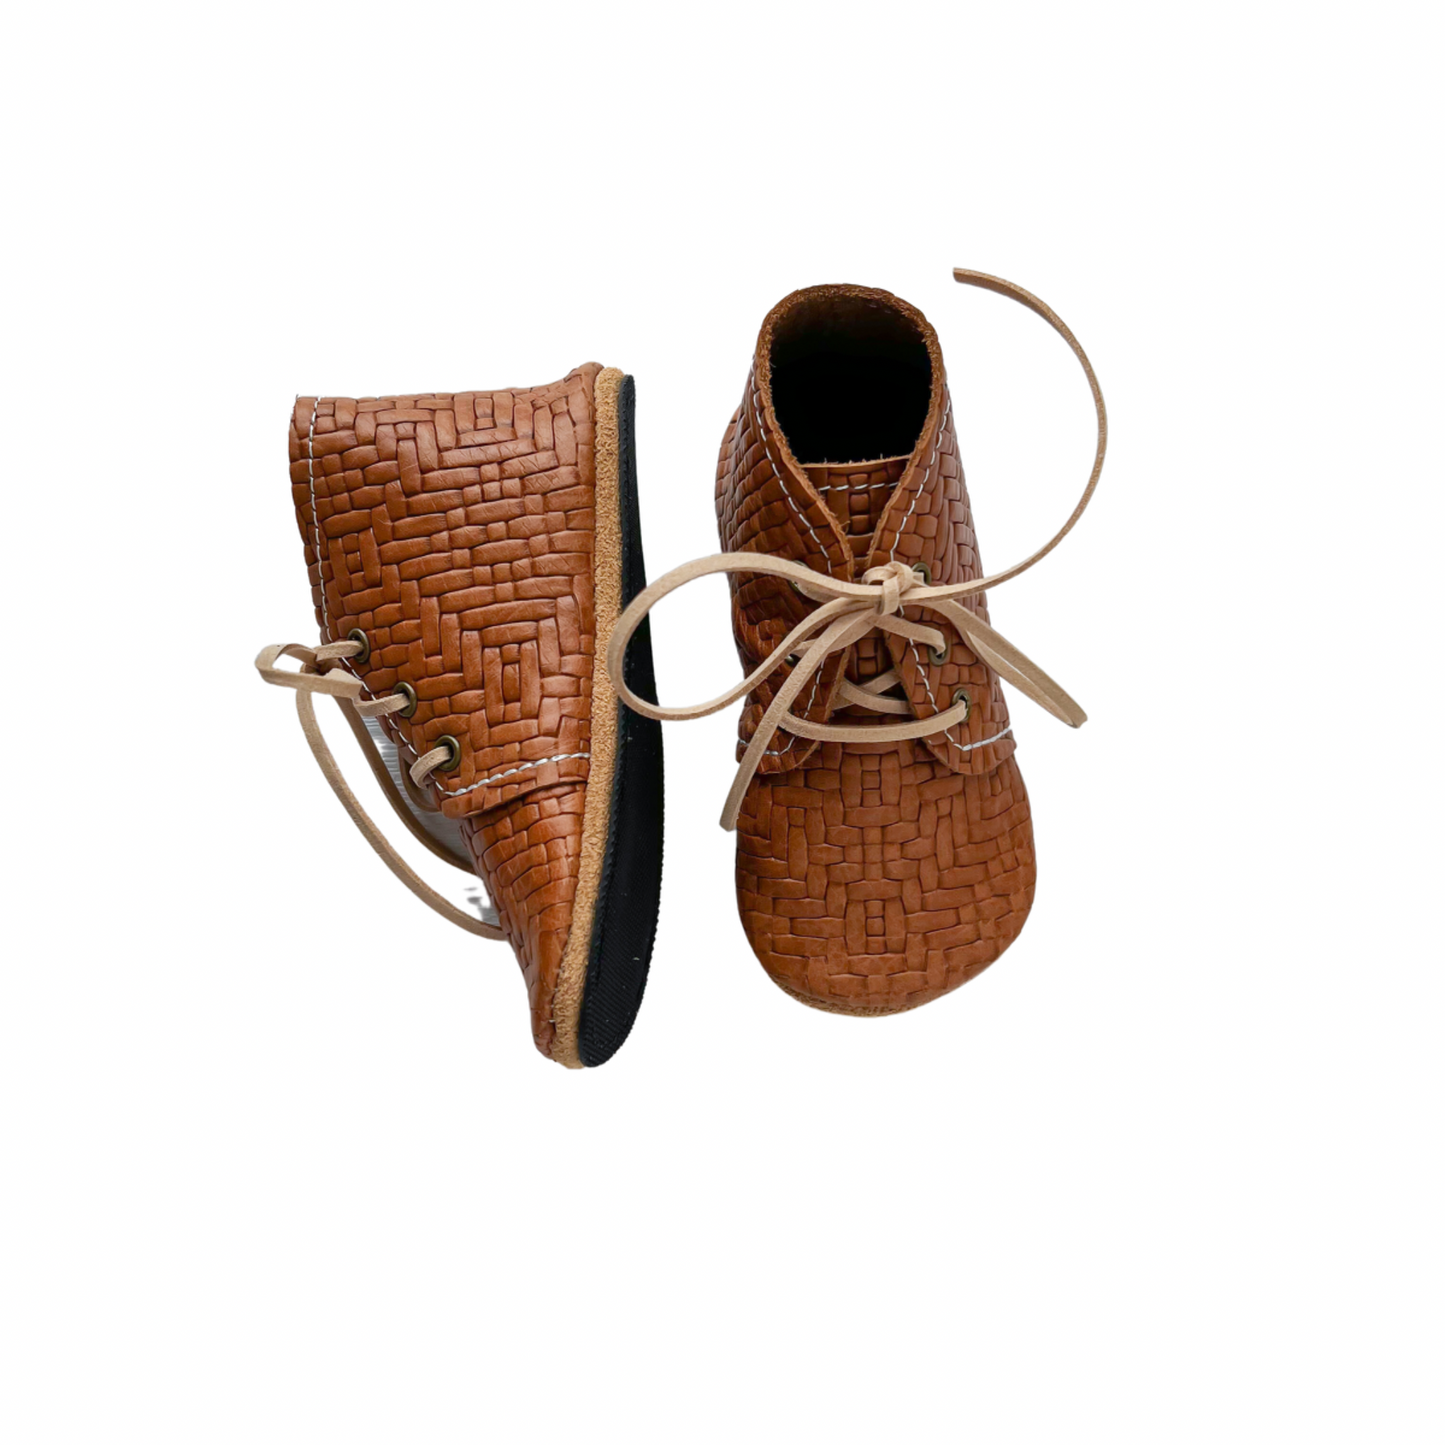 Oxfords (High Top) - Saddle Weave